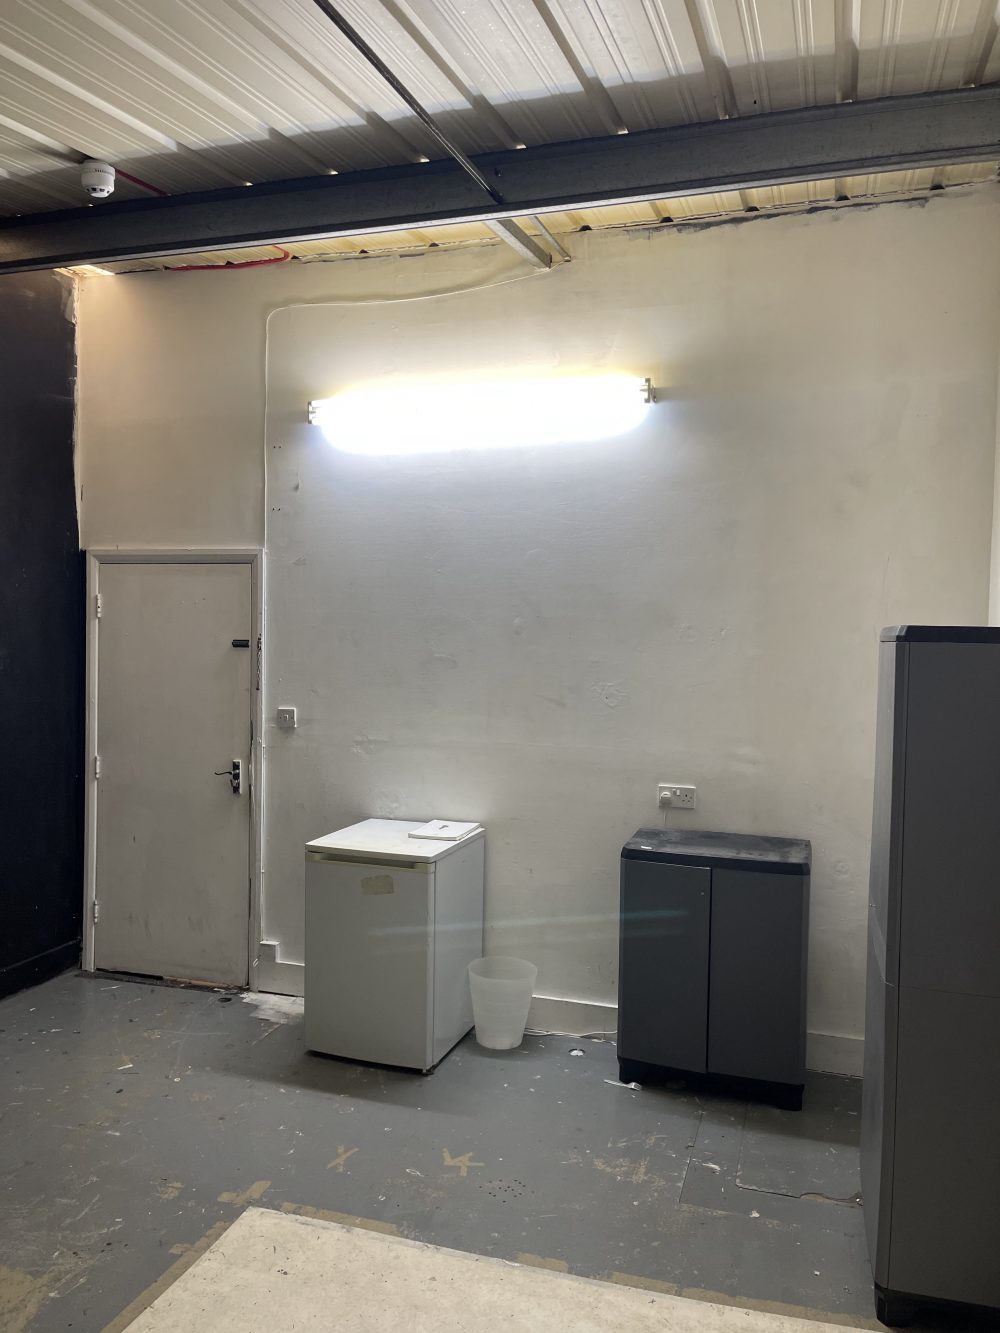 Light indurstrial unit to rent in N16 Stoke Newington Shelford Place PIc11